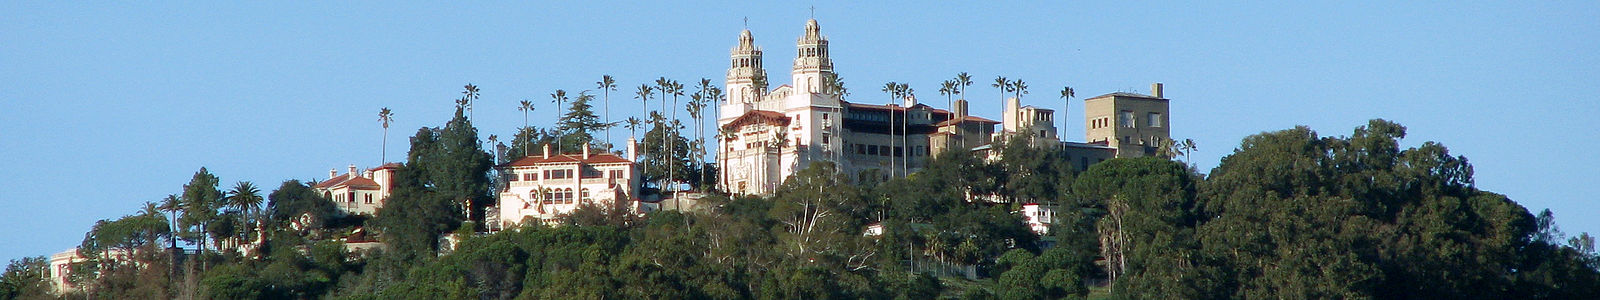 A large stone castle on a hill over looking the California coastline